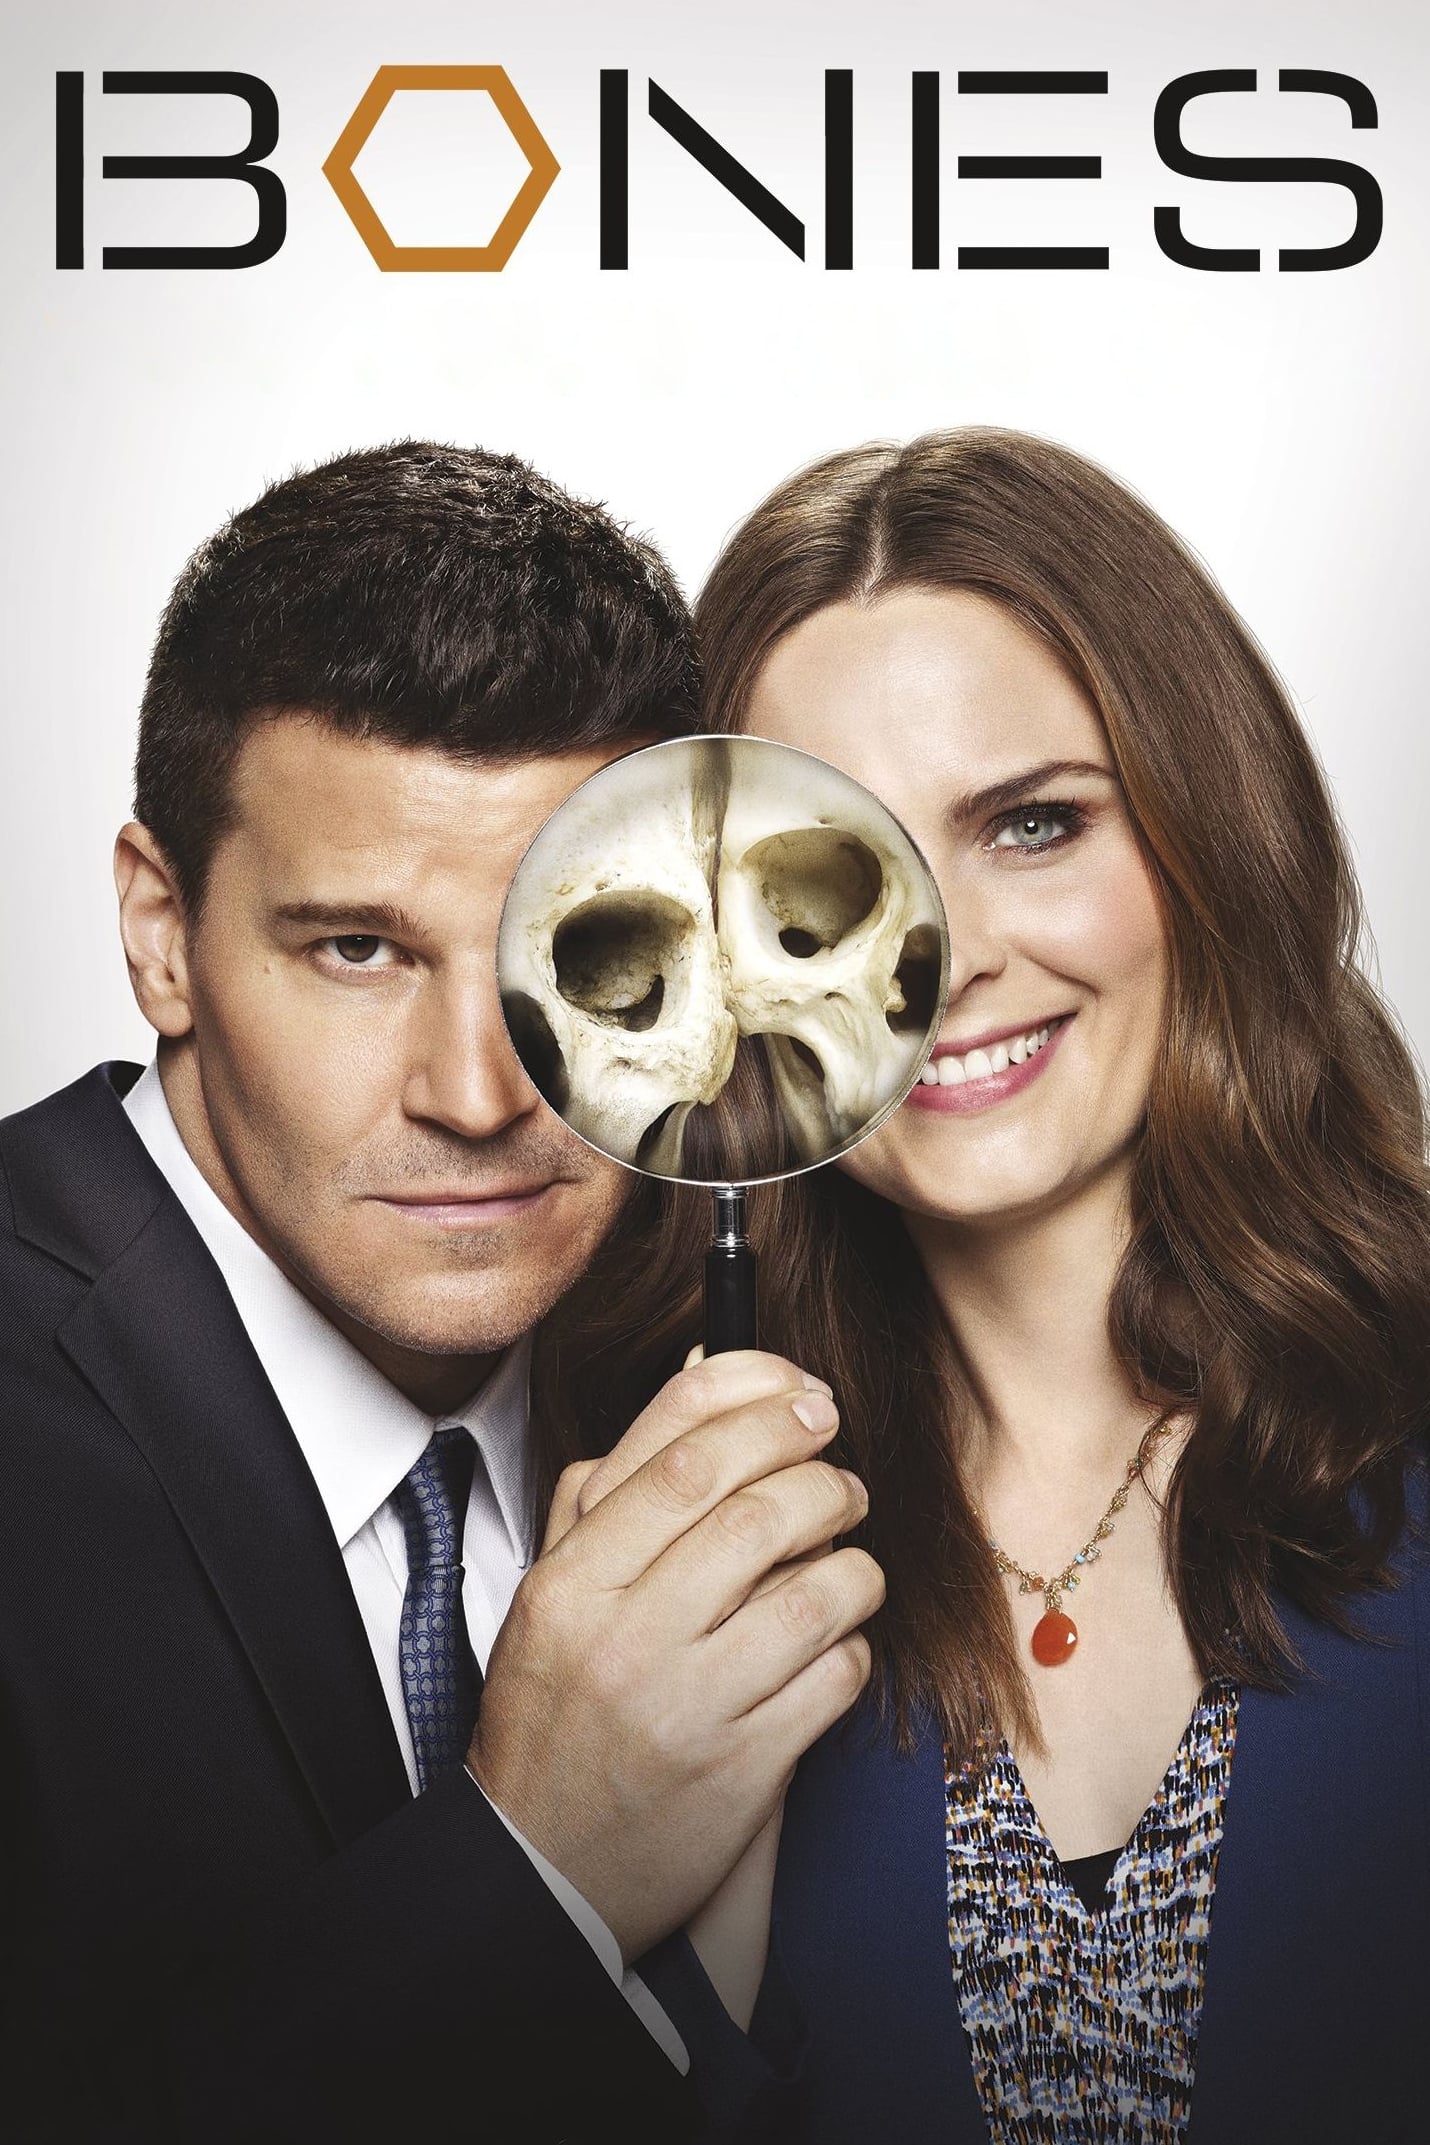 Bones TV Shows About Forensic Science